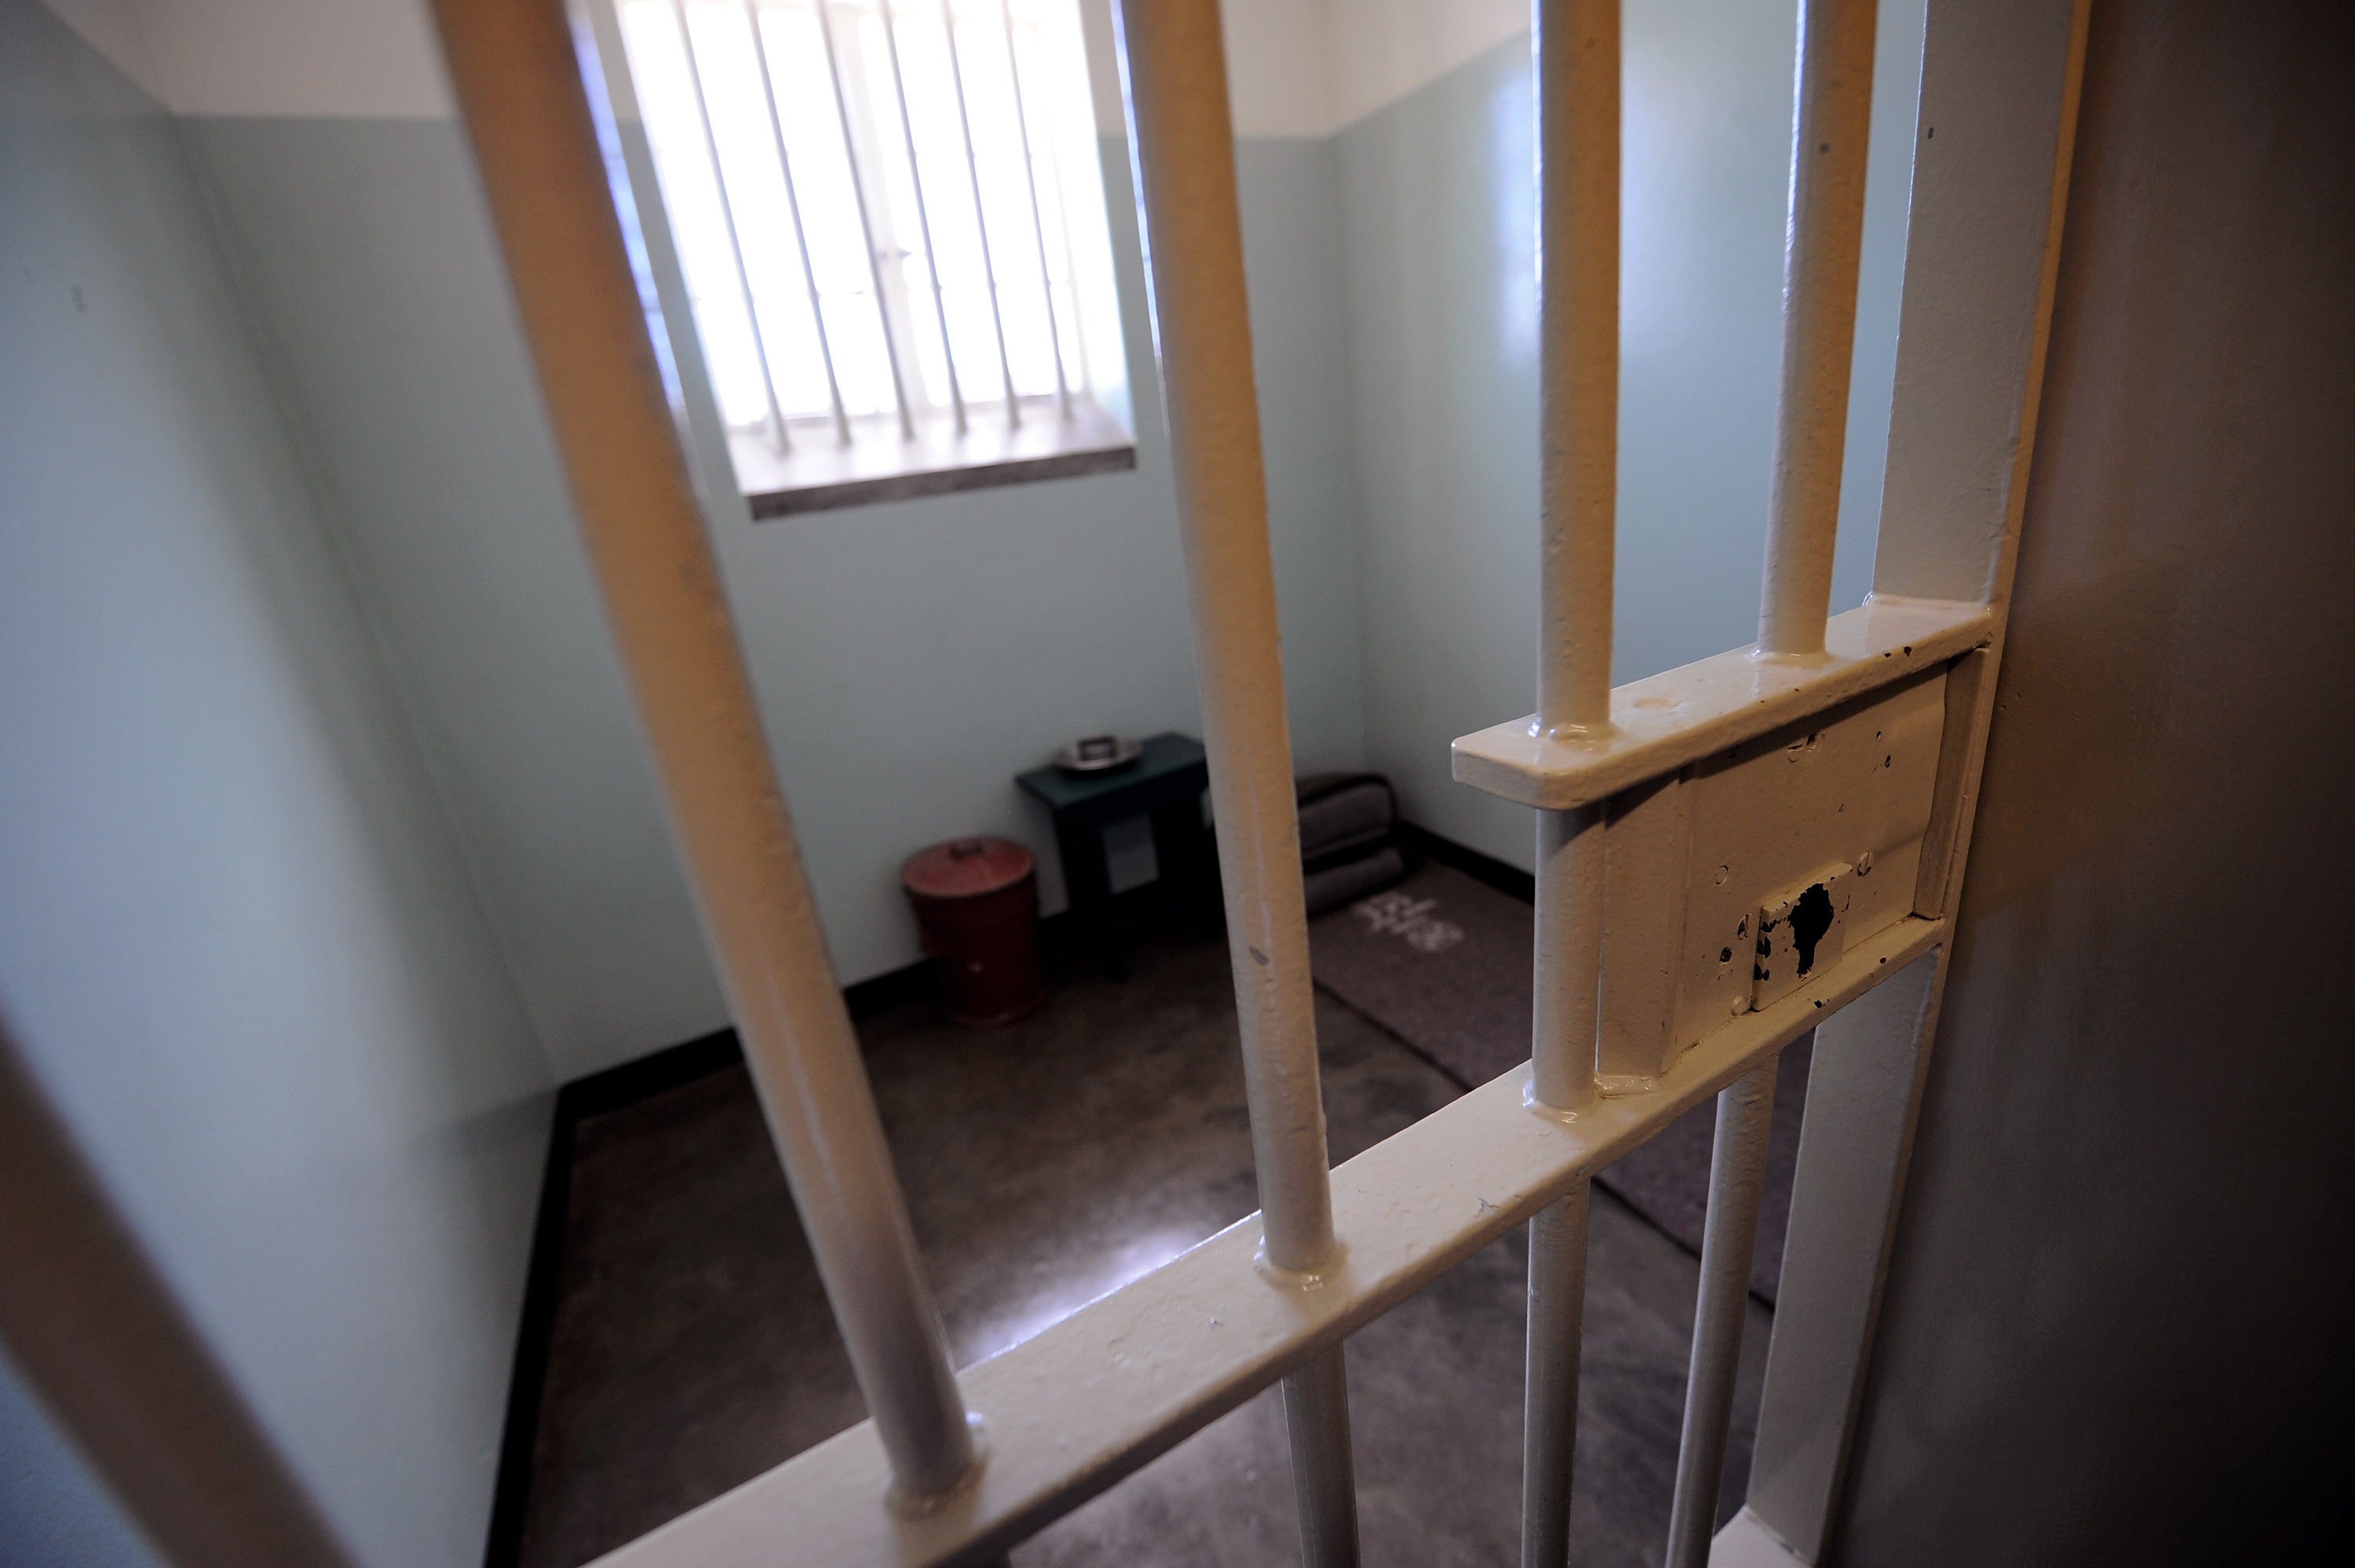 Mandela’s old prison cell in Robben Island, South Africa